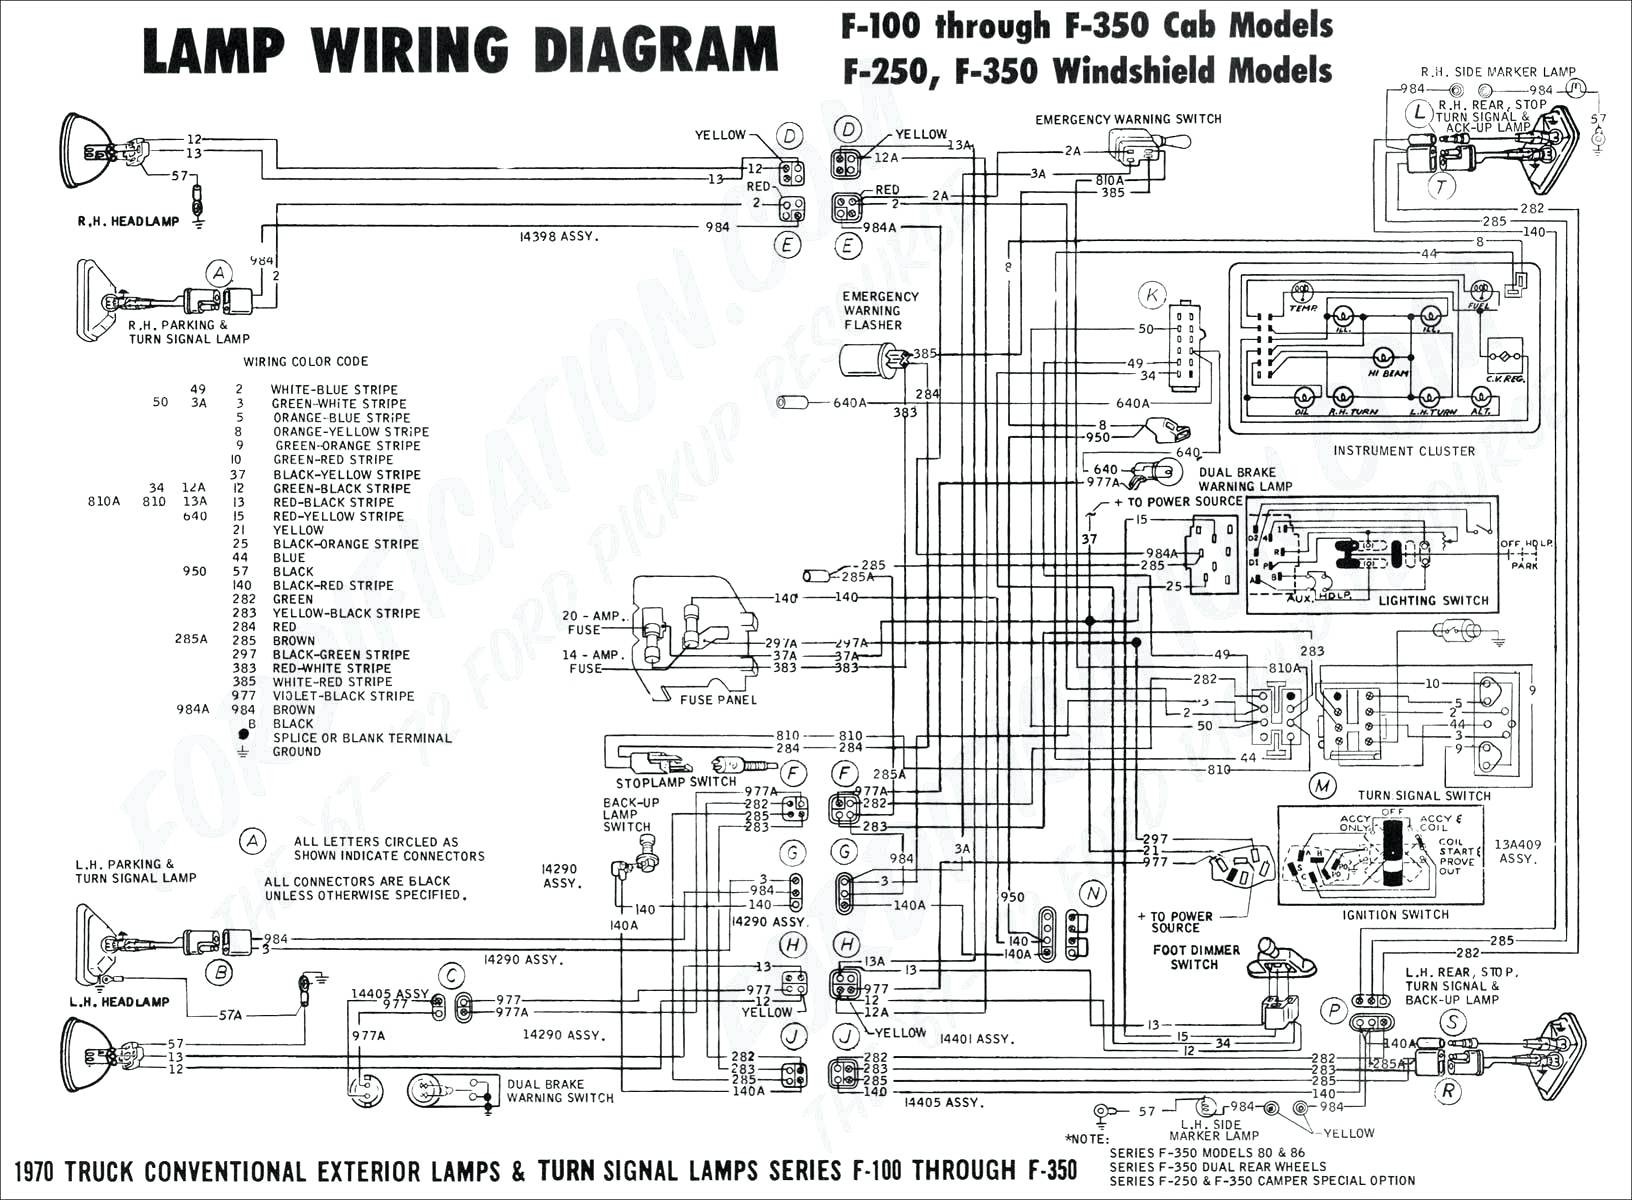 micro usb wiring diagram moreover 3 way switch wiring also hot rod rh moffmall co